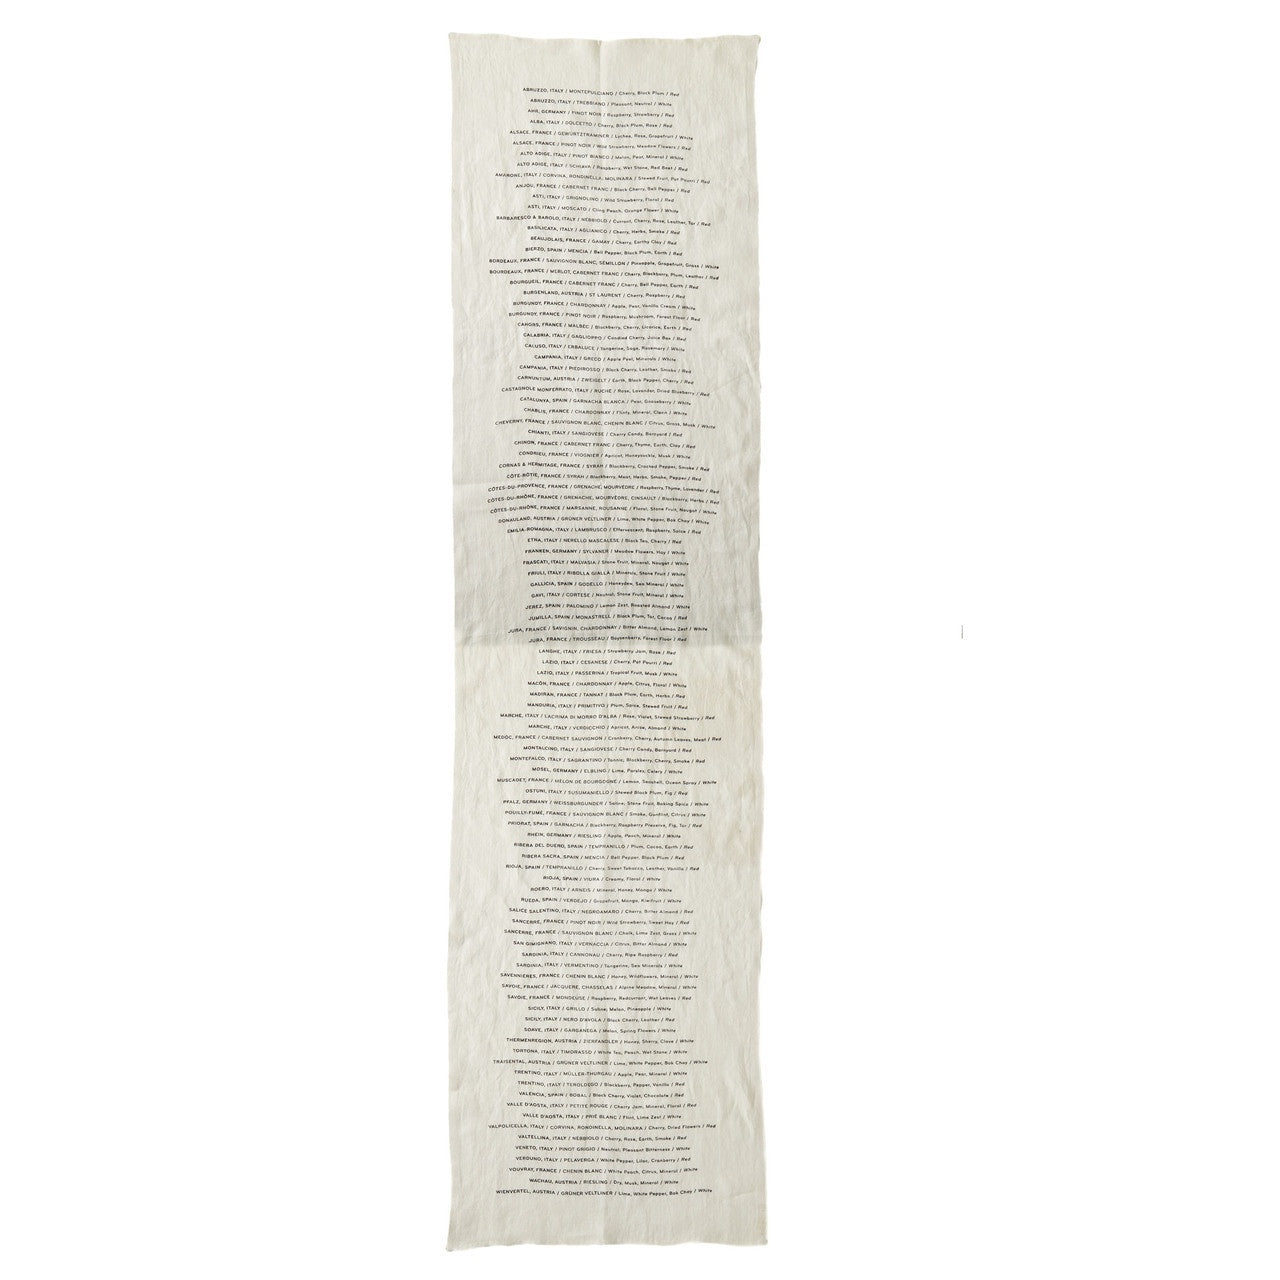 A long, vertical scroll of paper with dense, handwritten text covering its entire surface, displayed against a plain, light background in a Scottsdale Arizona bungalow. This Wine List Runner by Sir/Madam.